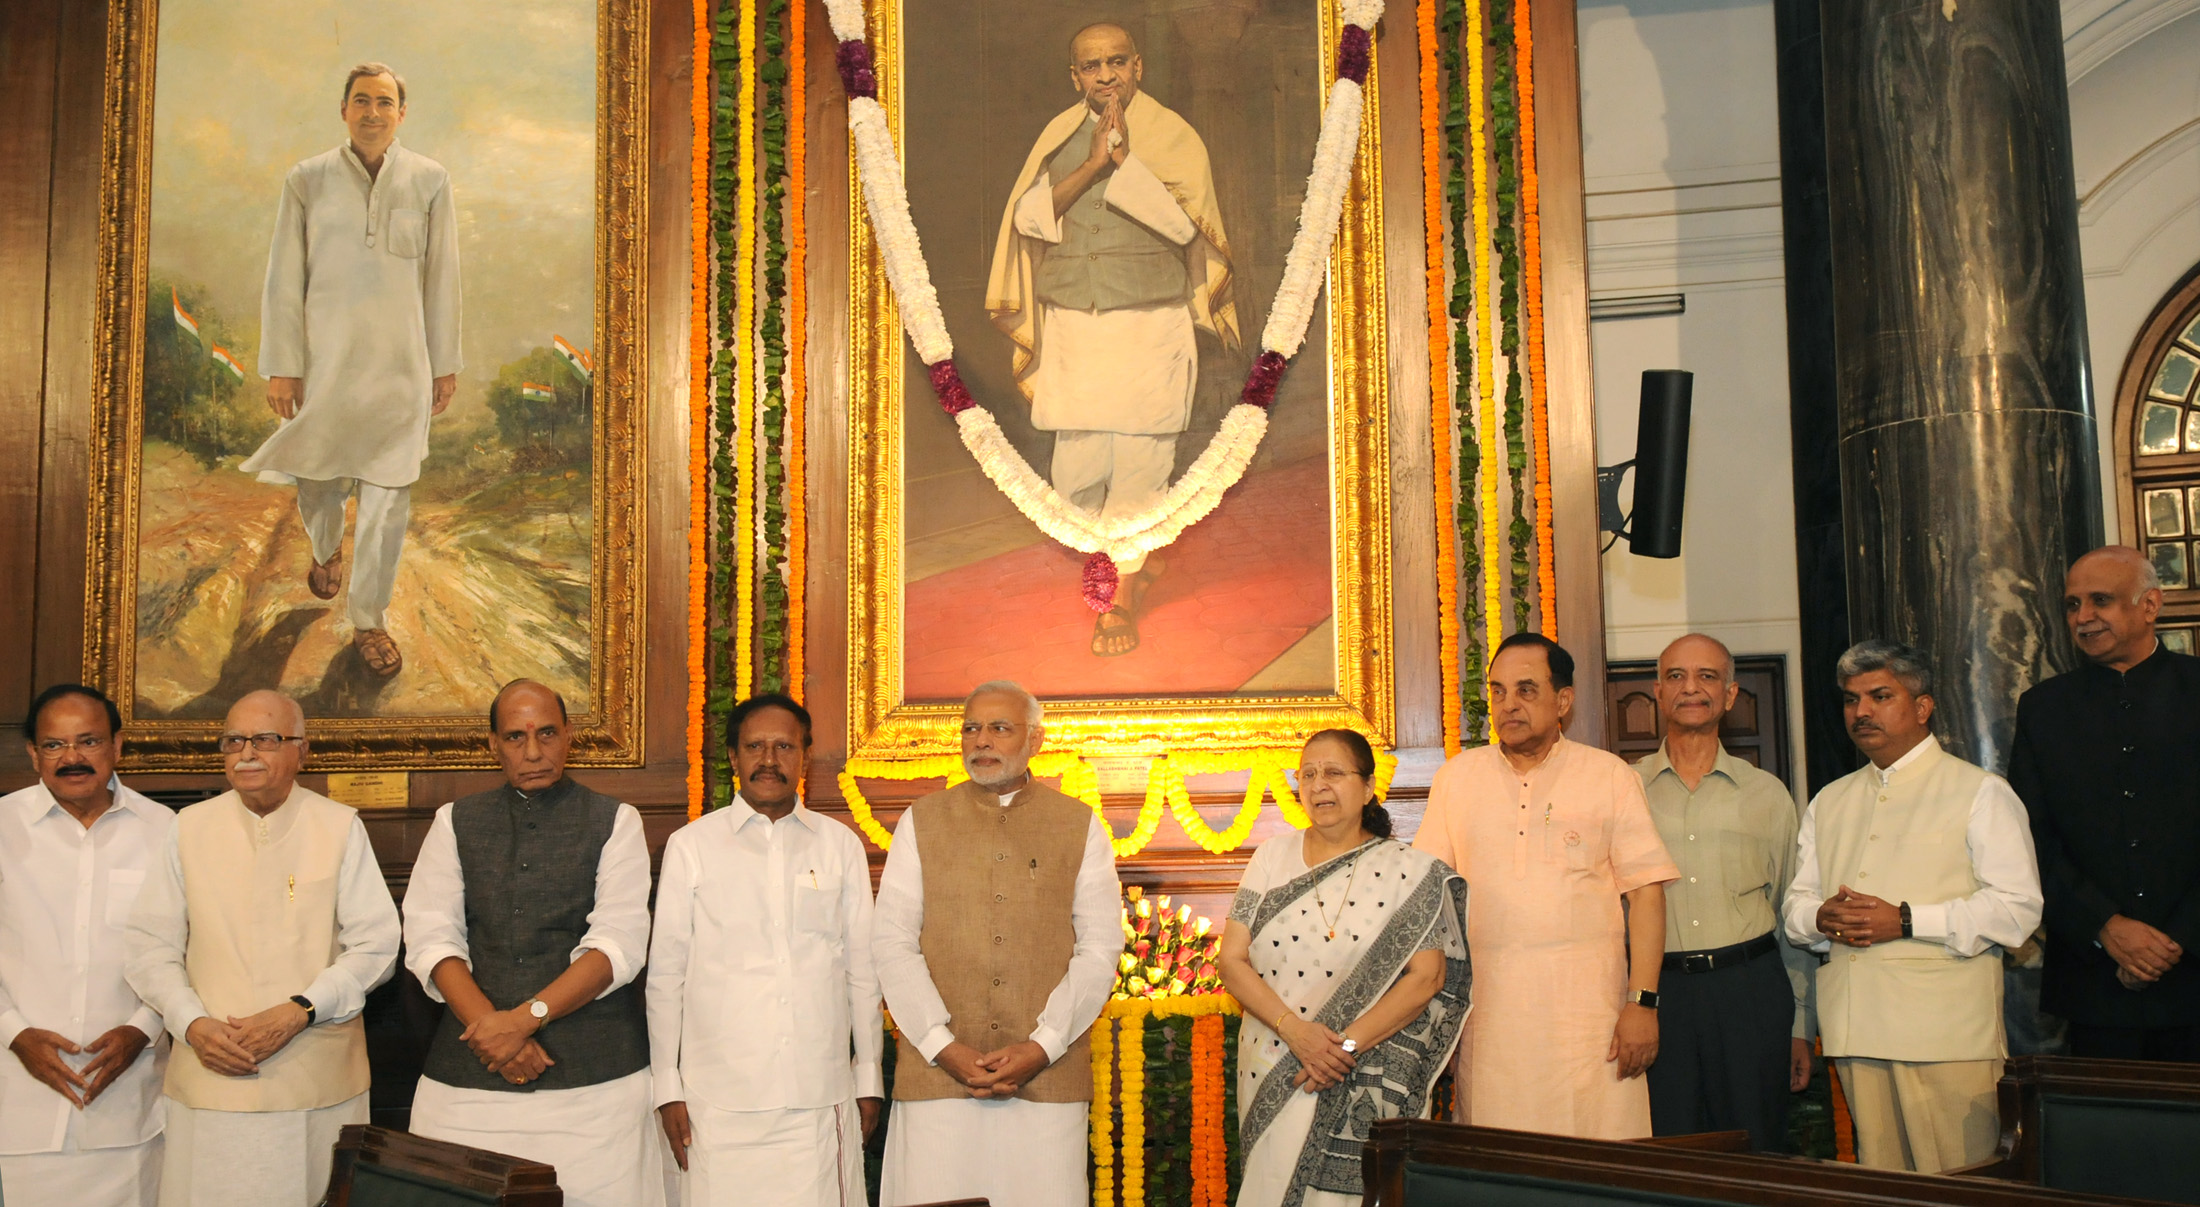 The Prime Minister, Shri Narendra Modi, the Speaker, Lok Sabha, Smt. Sumitra Mahajan and other dignitaries paid tributes at the portrait of Sardar Vallabhbhai Patel, on his Birth Anniversary, at Parliament House, in New Delhi on October 31, 2015.